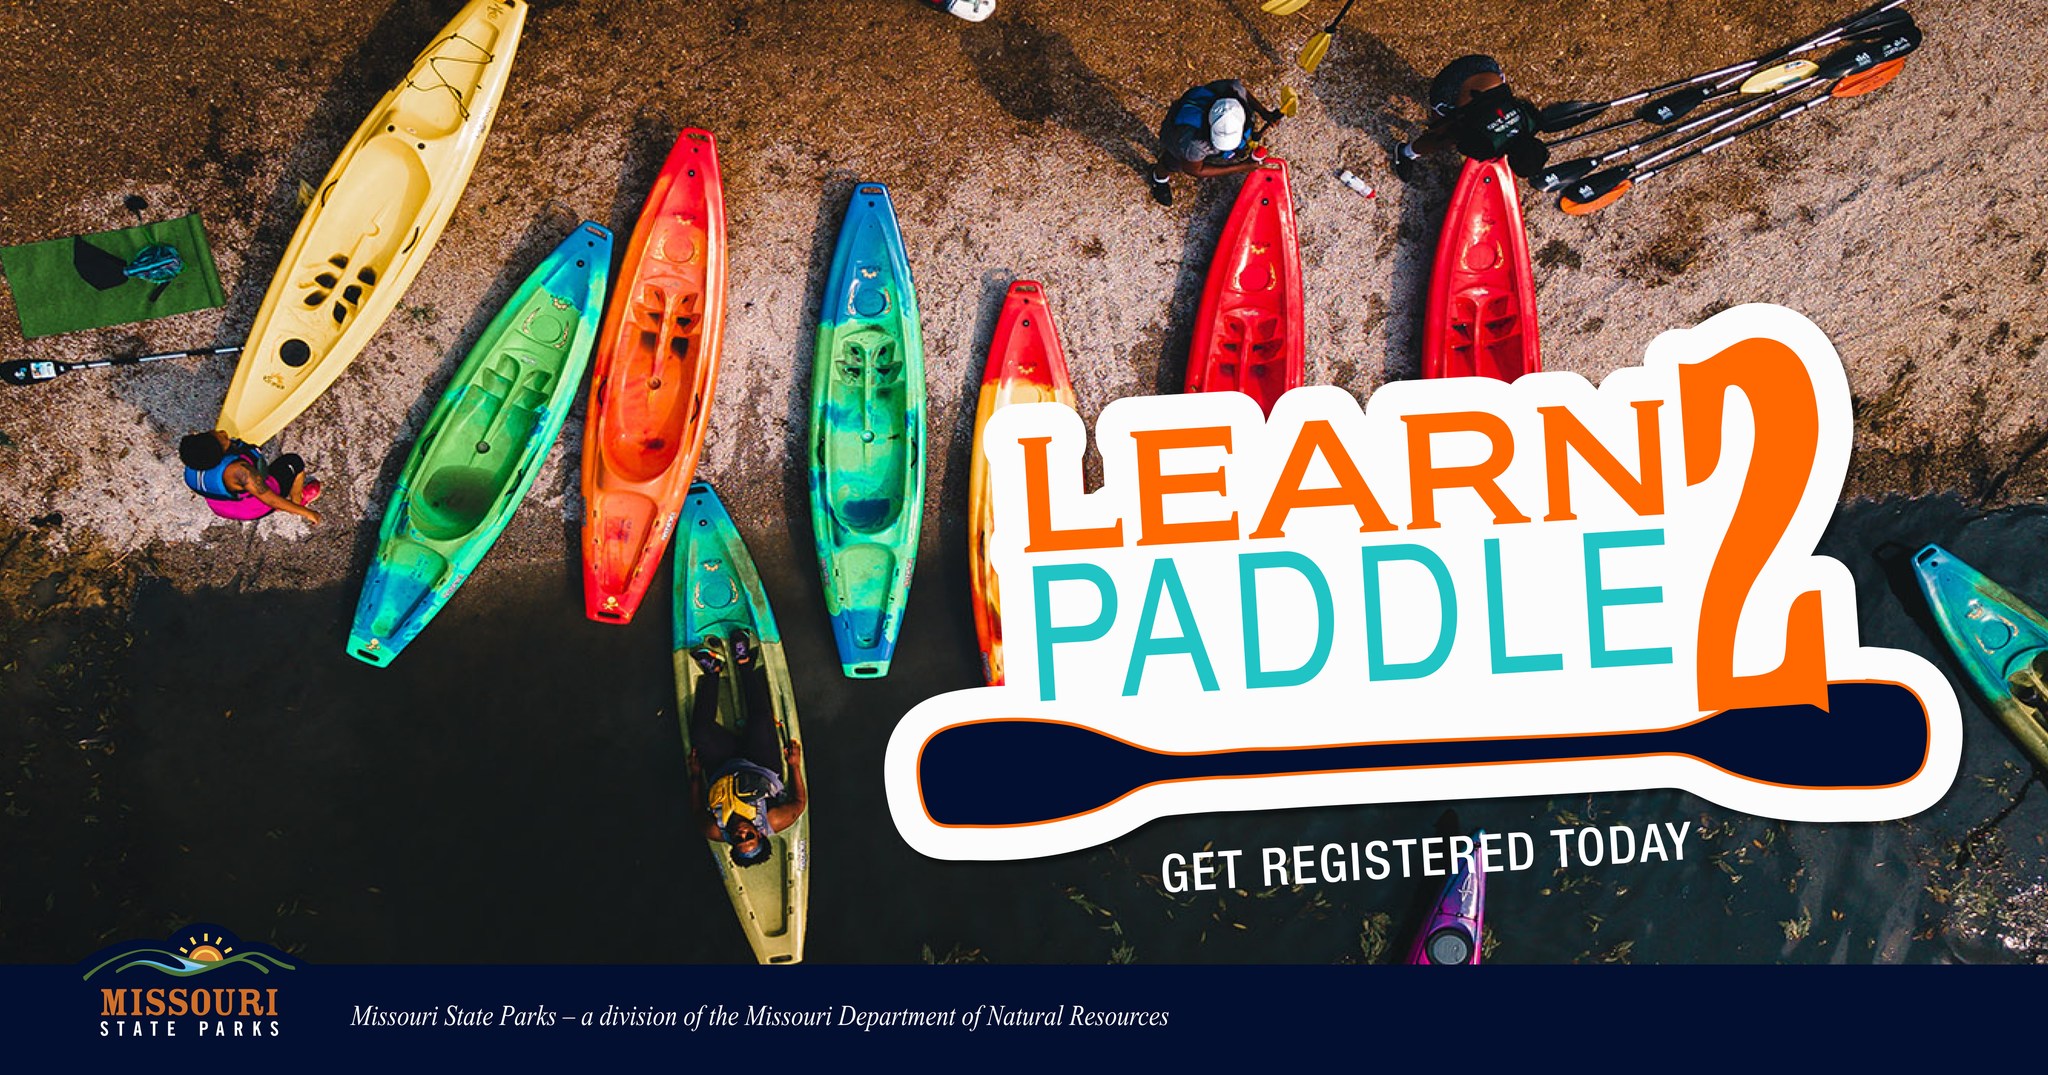 Check more about Learn 2 Paddle